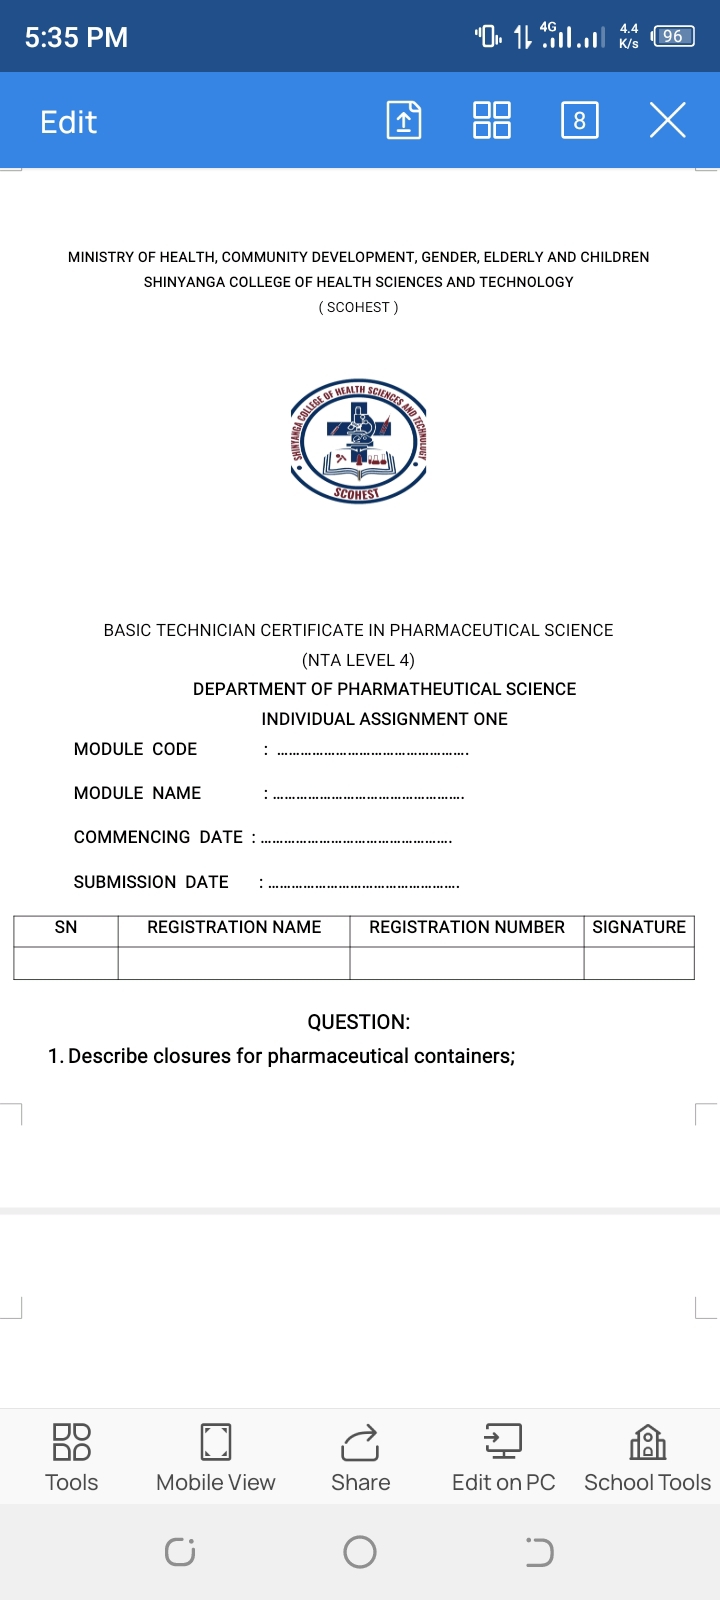 # in essay form describe closures for pharmaceutical container?